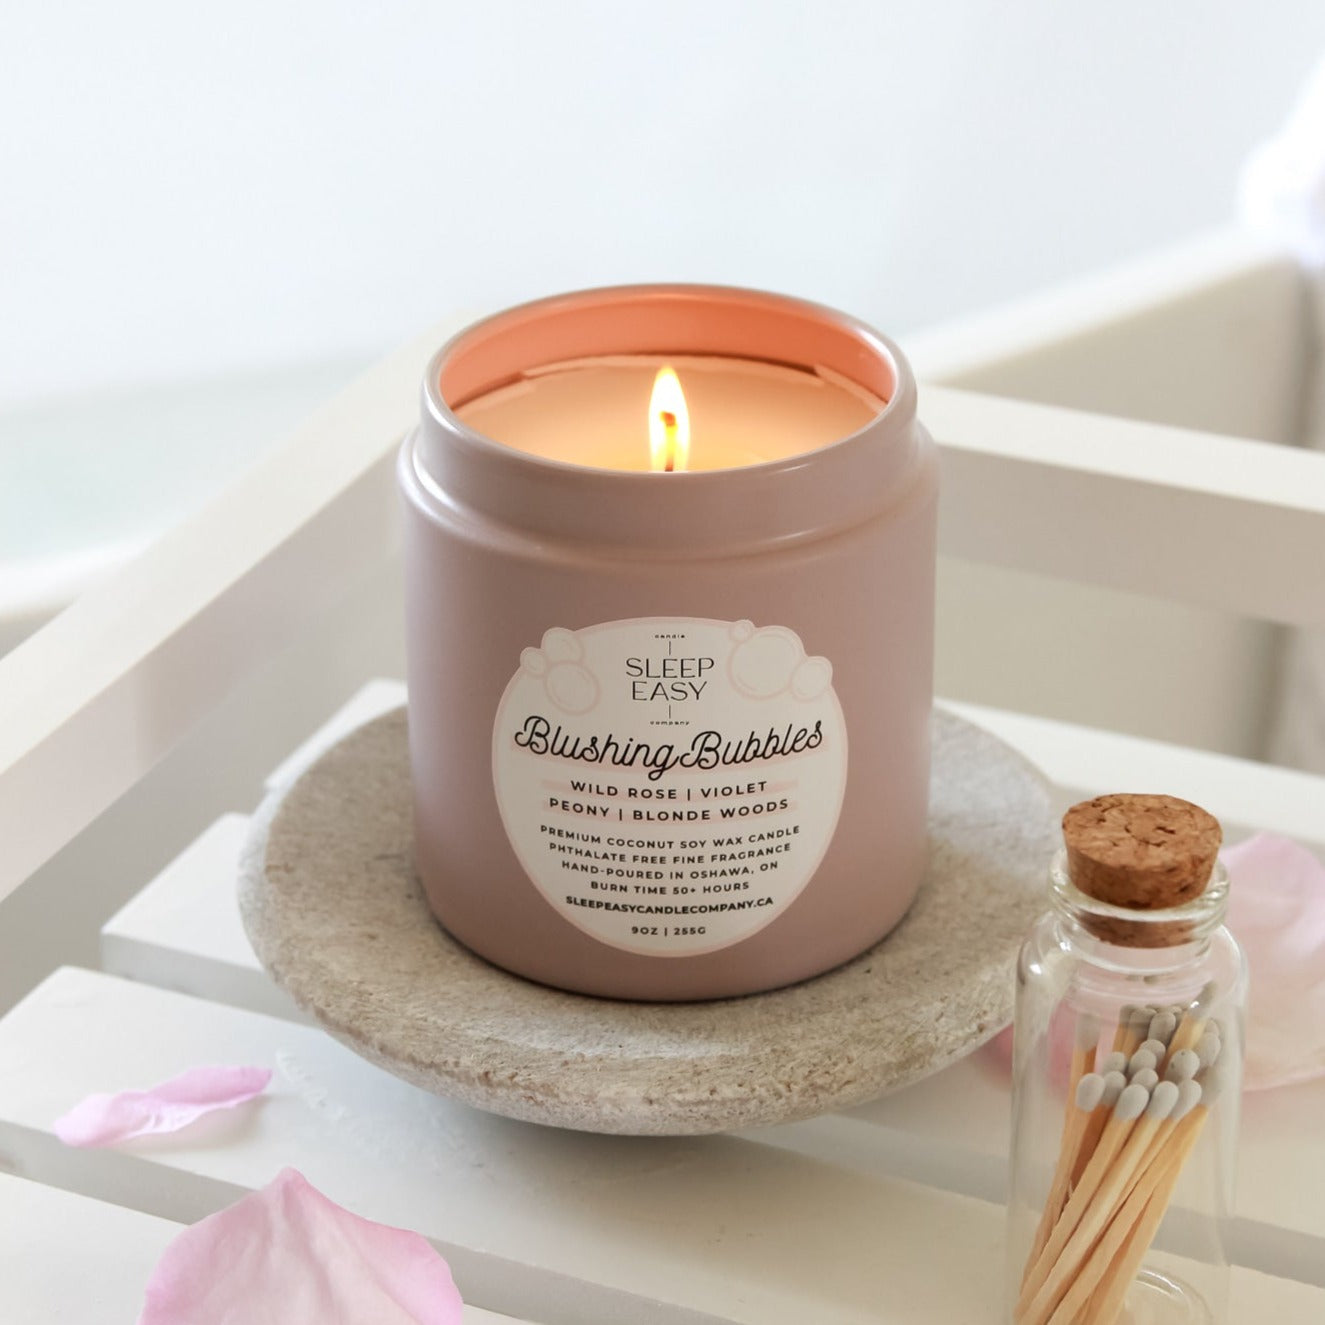 Blushing Bubbles candle is displayed in front of a bathtub filled with water and rose petals. The candle sits on a stone display with white matches and flower petals on the side.